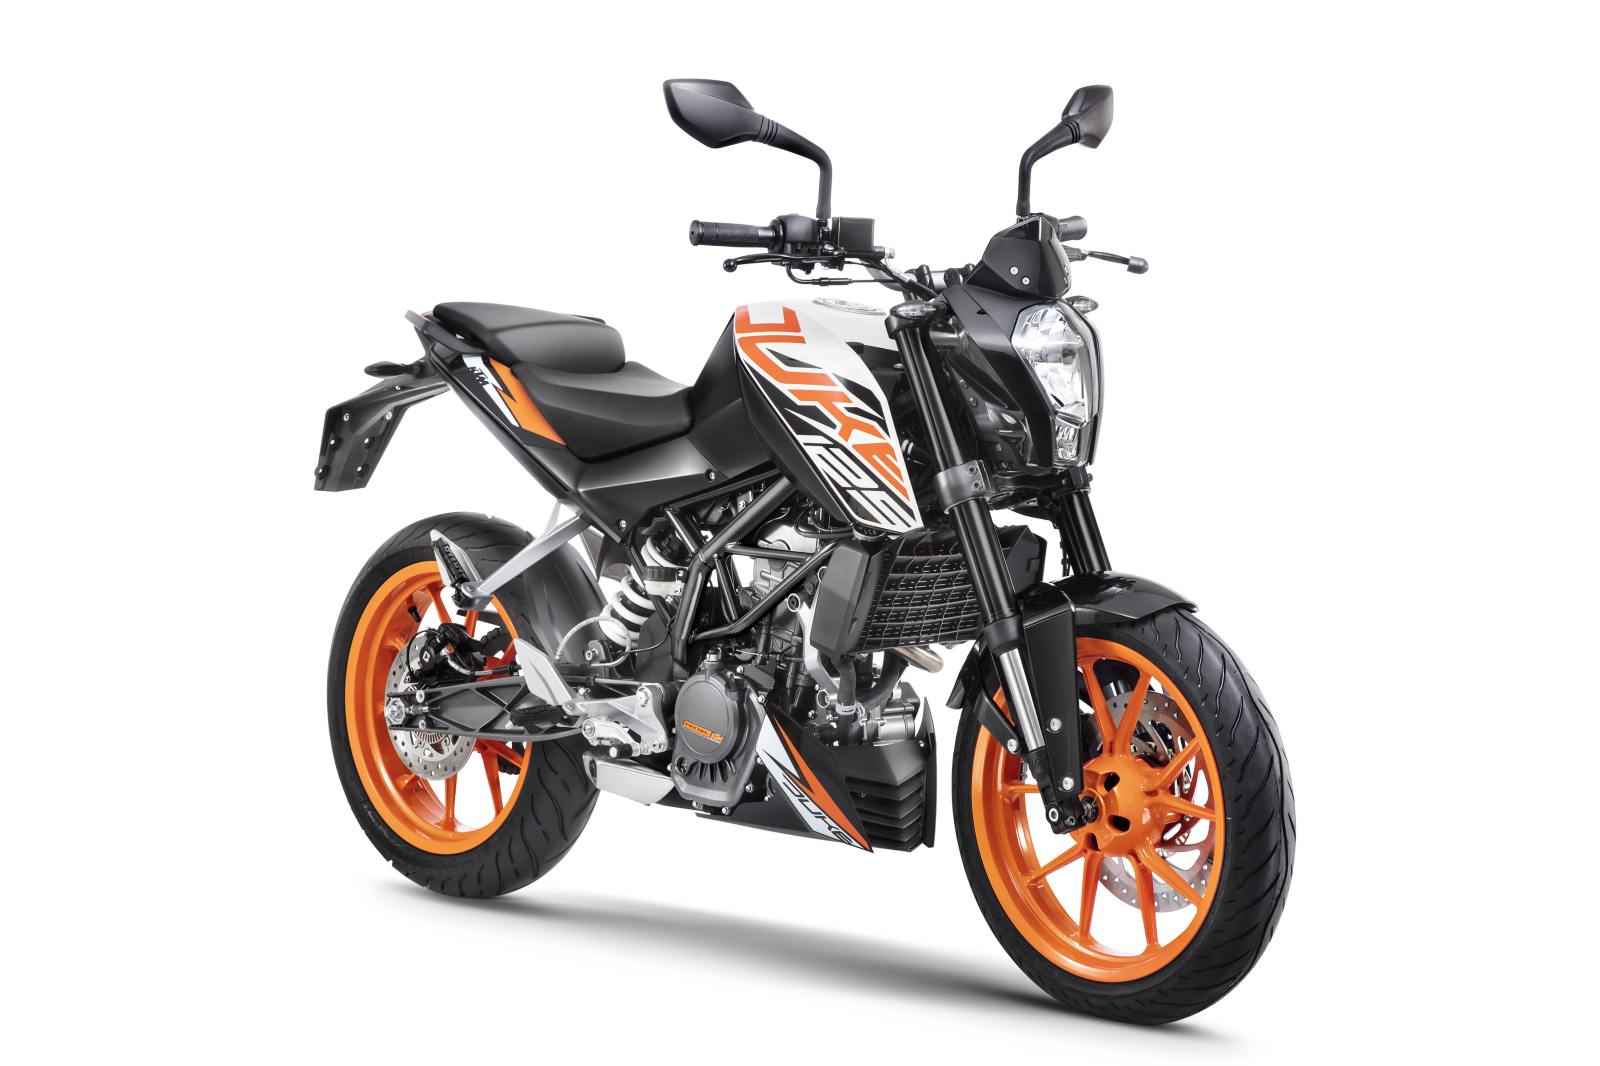 KTM Duke 125 ABS Launched In India At INR 1 18 Lakh 